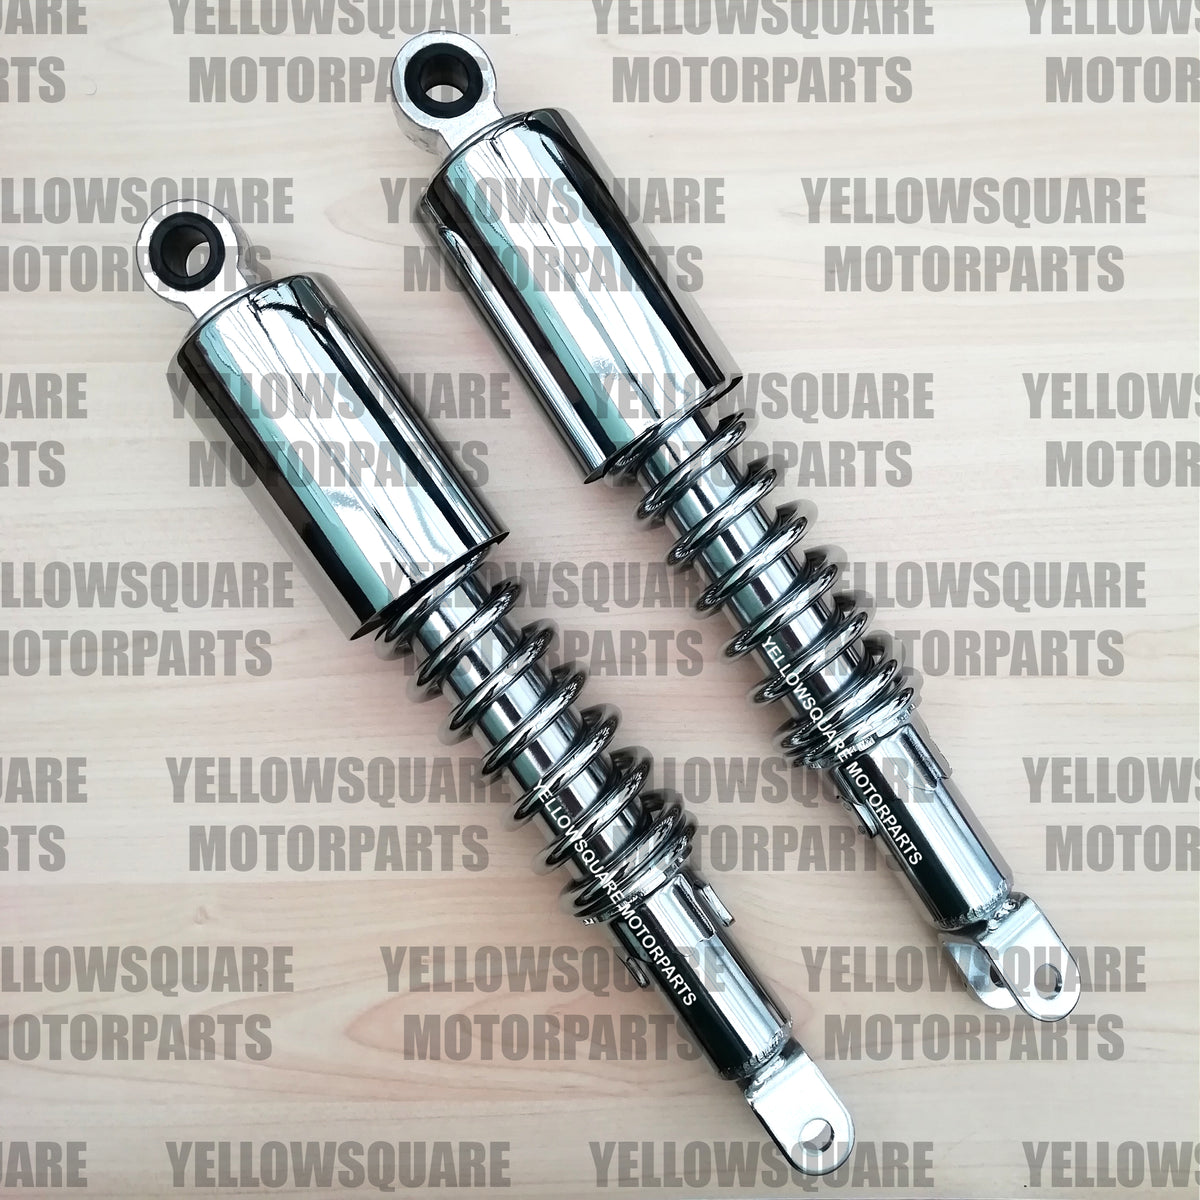 Chrome Rear Shock Absorbers Honda CB650 CB 650 (1979-1985) 335mm – Square  Motorcycle Parts